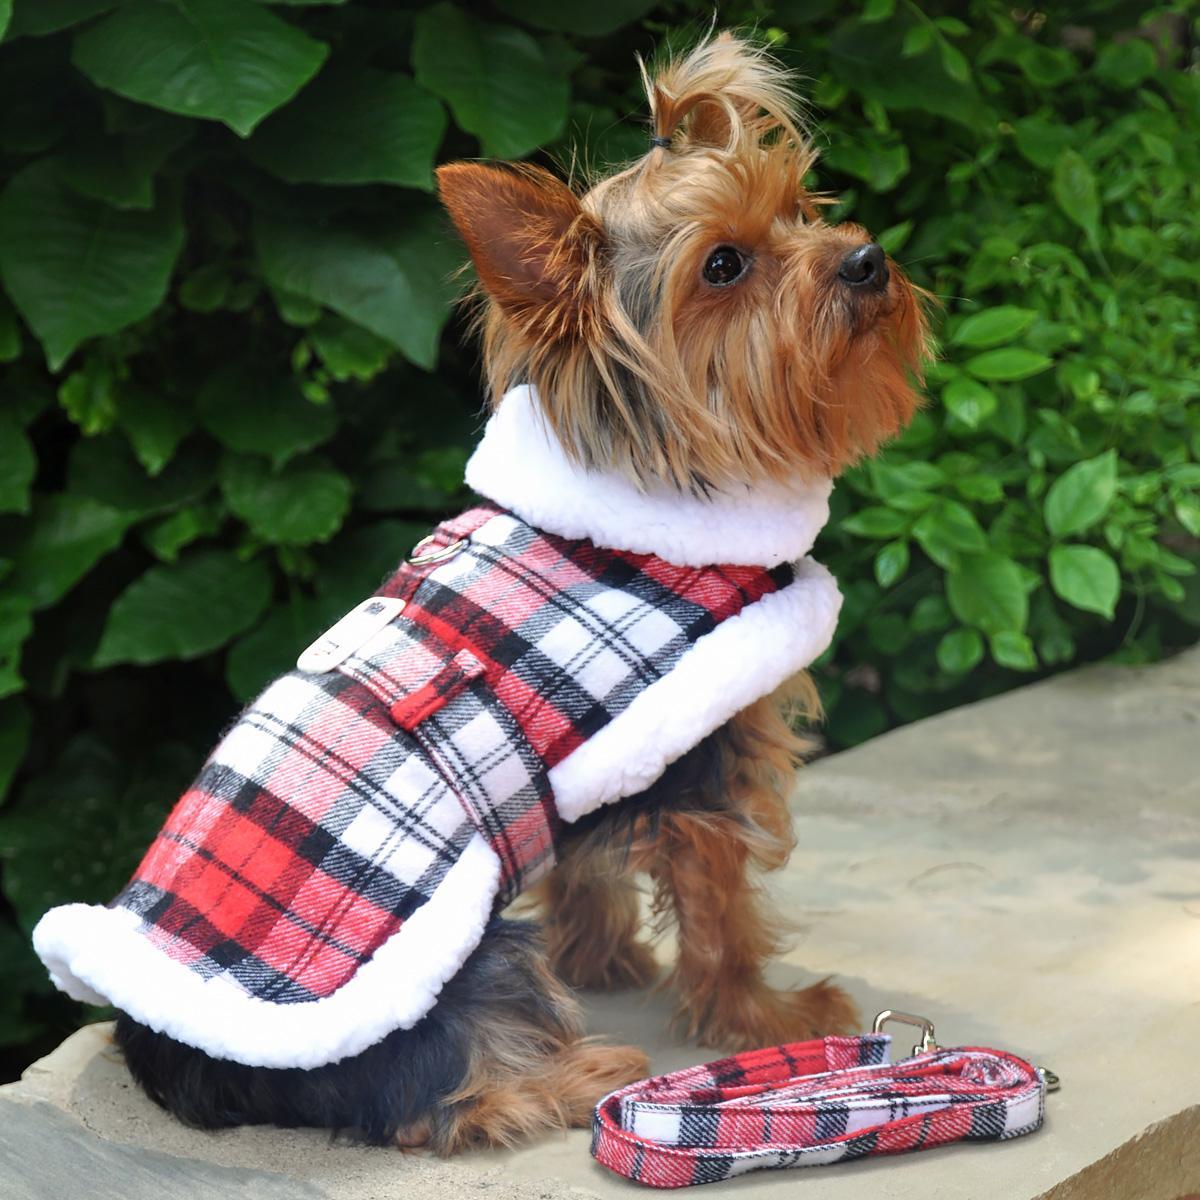 Doggie Design Plaid Sherpa Fleece Lined Dog Harness Coat - Red & White